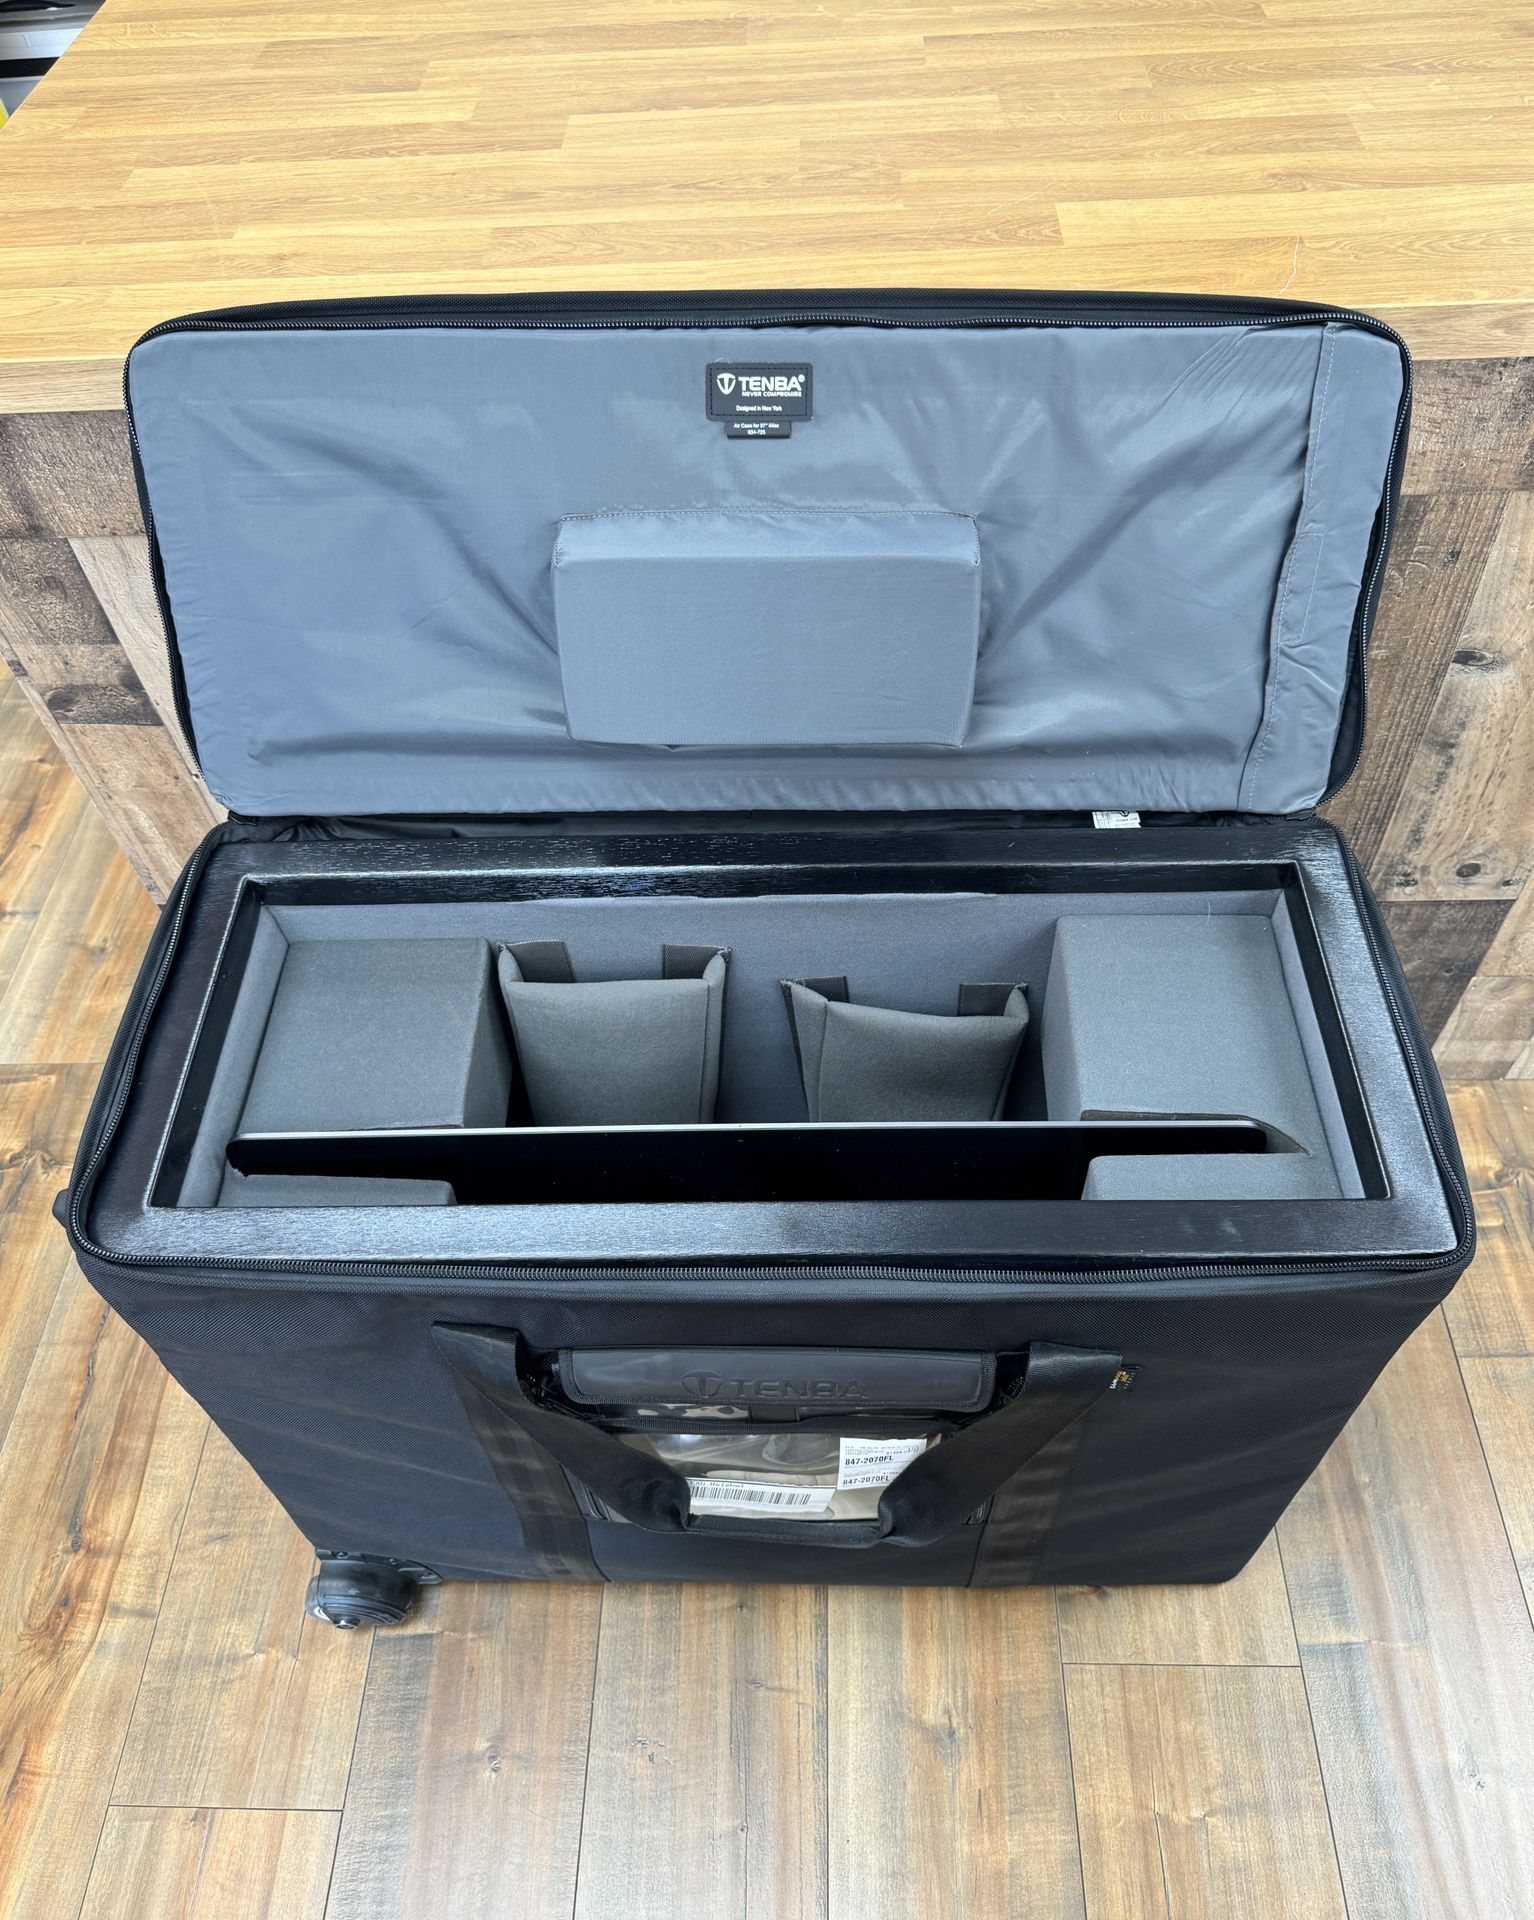 iMac Travel Case 27 Inch** Travel Case Only 